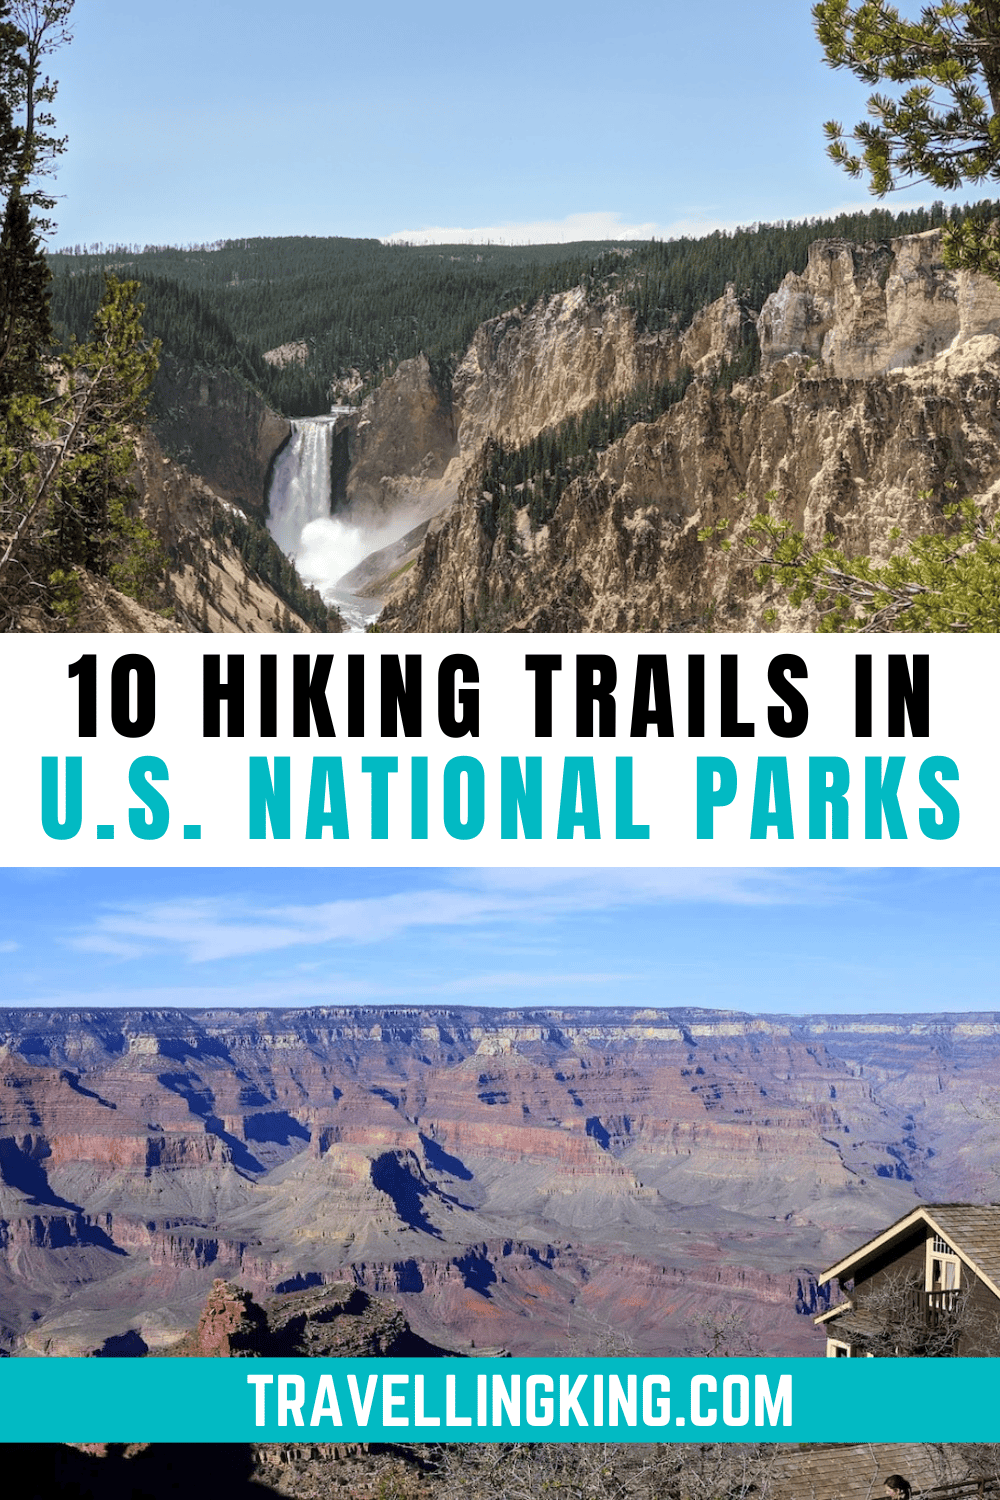 10 of The Best Hiking Trails in U.S. National Parks & Forests